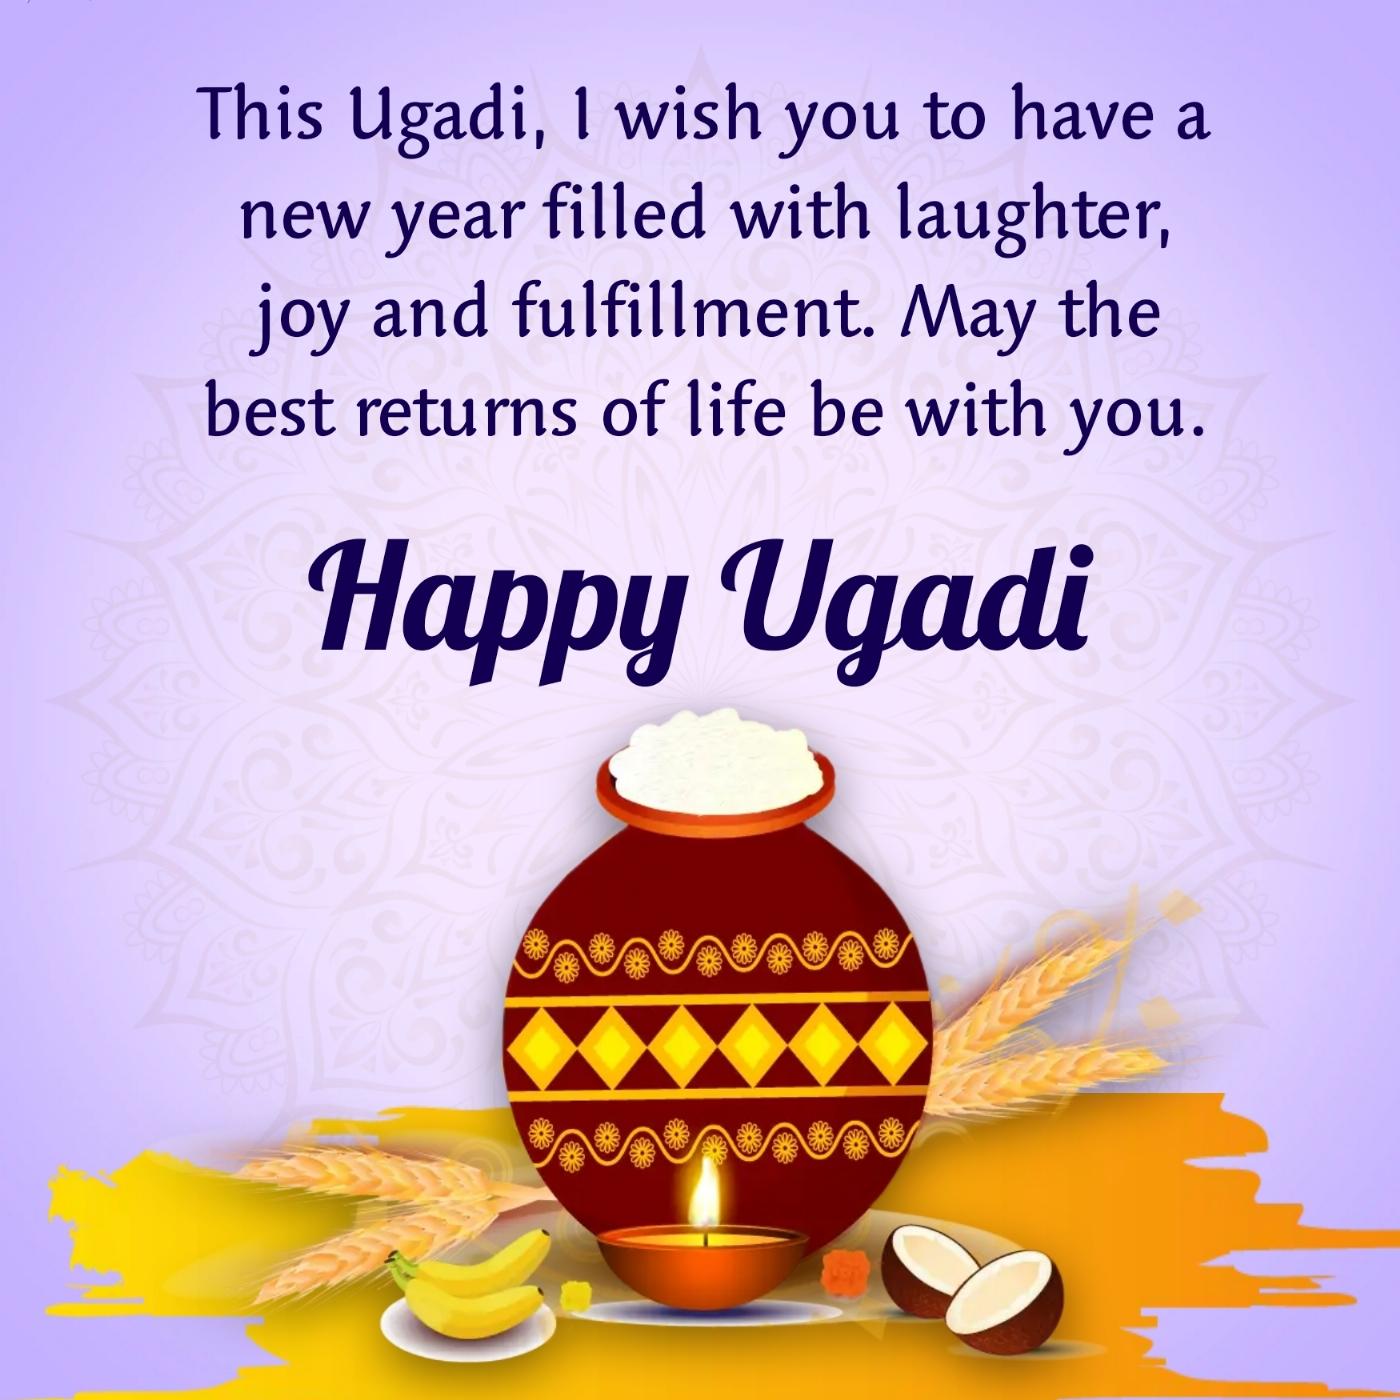 This Ugadi I wish you to have a new year filled with laughter